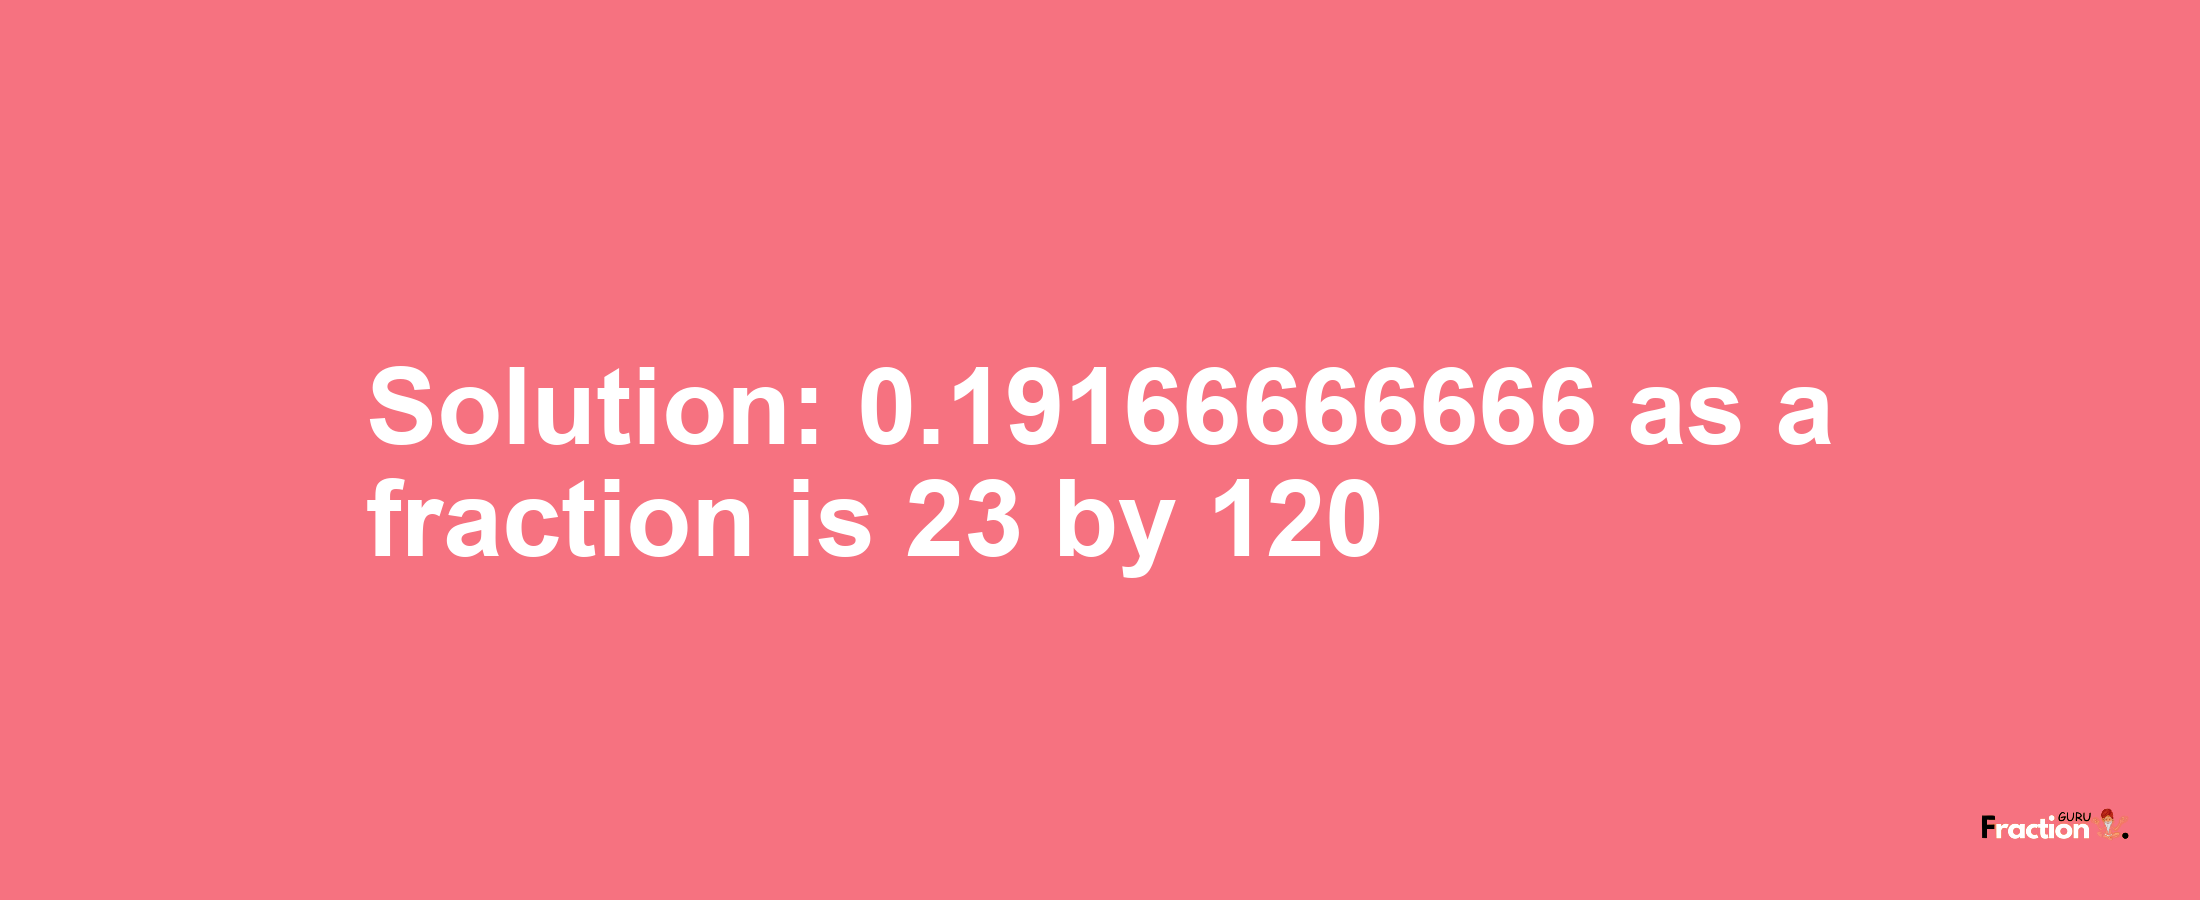 Solution:0.19166666666 as a fraction is 23/120